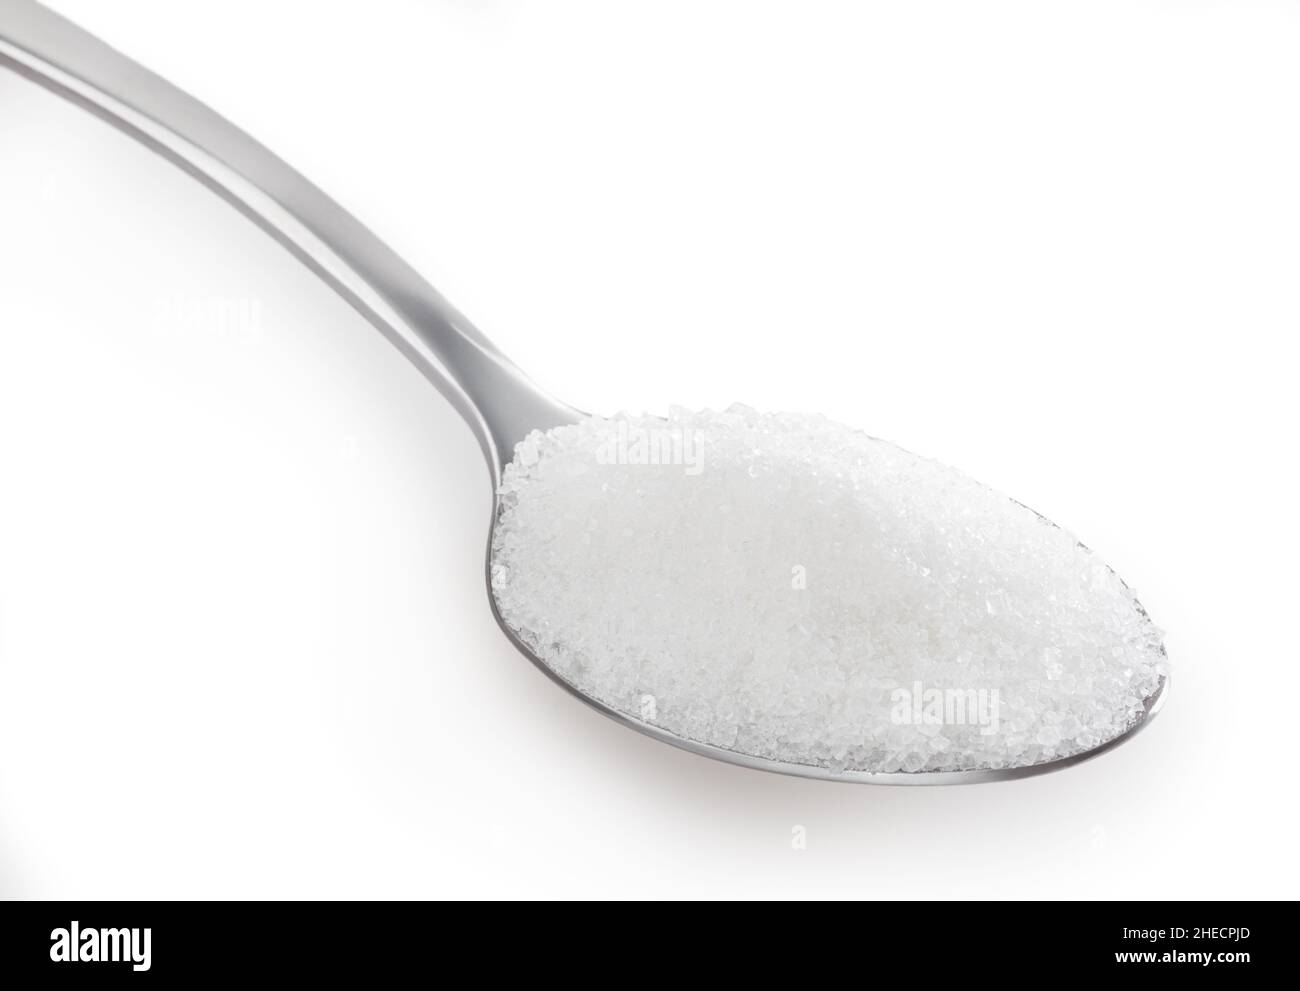 Teaspoon of white sugar isolated on white background with clipping path Stock Photo